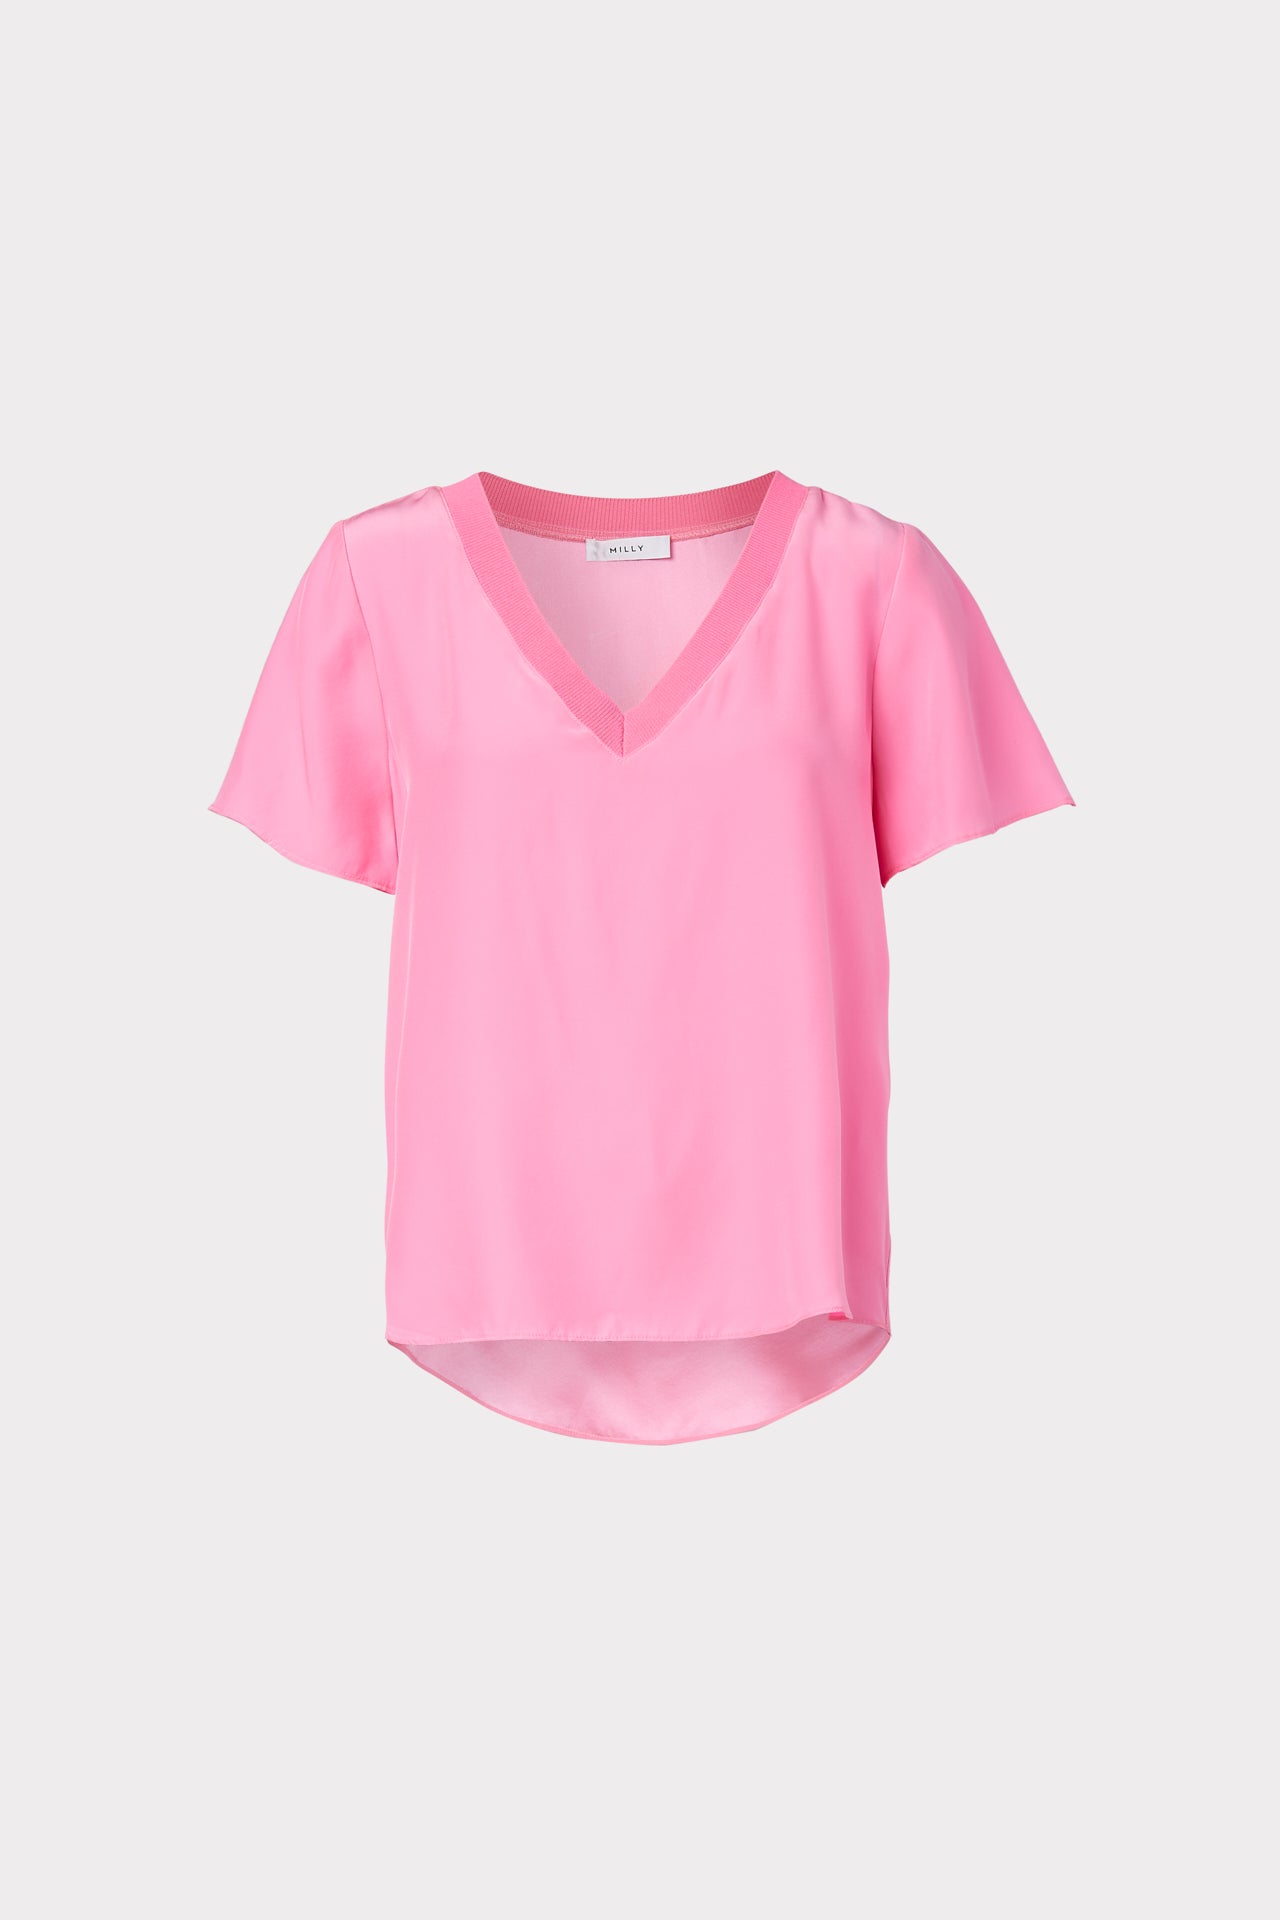 Milly Silk Tee In Pink